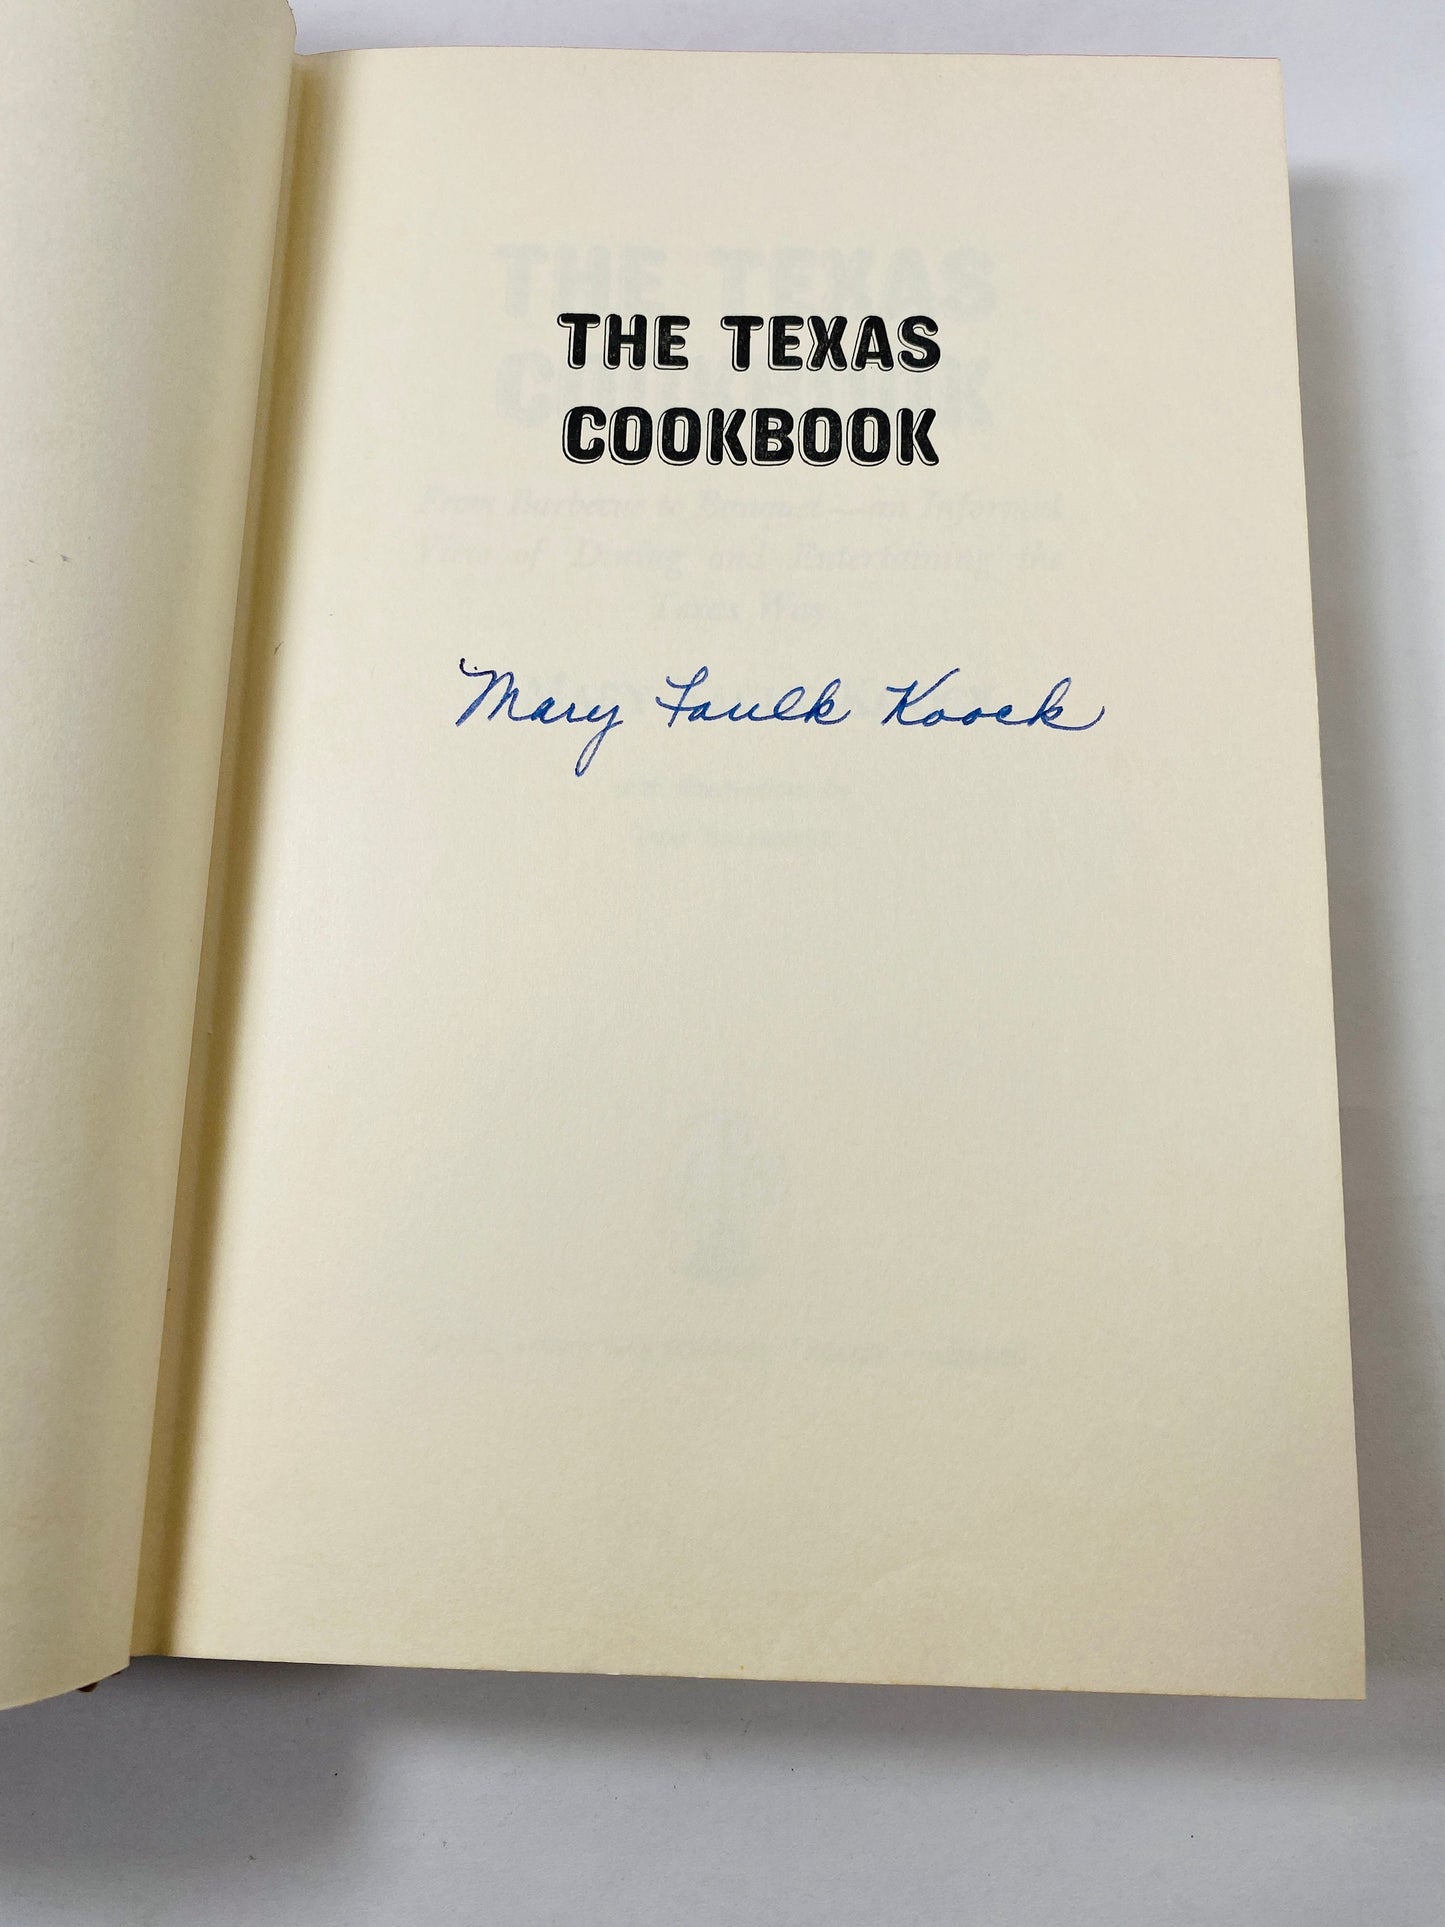 SIGNED Texas Cookbook FIRST EDITION Barbecue to Banquet vintage book circa 1965 by Mary Faulk Koock Christmas gift